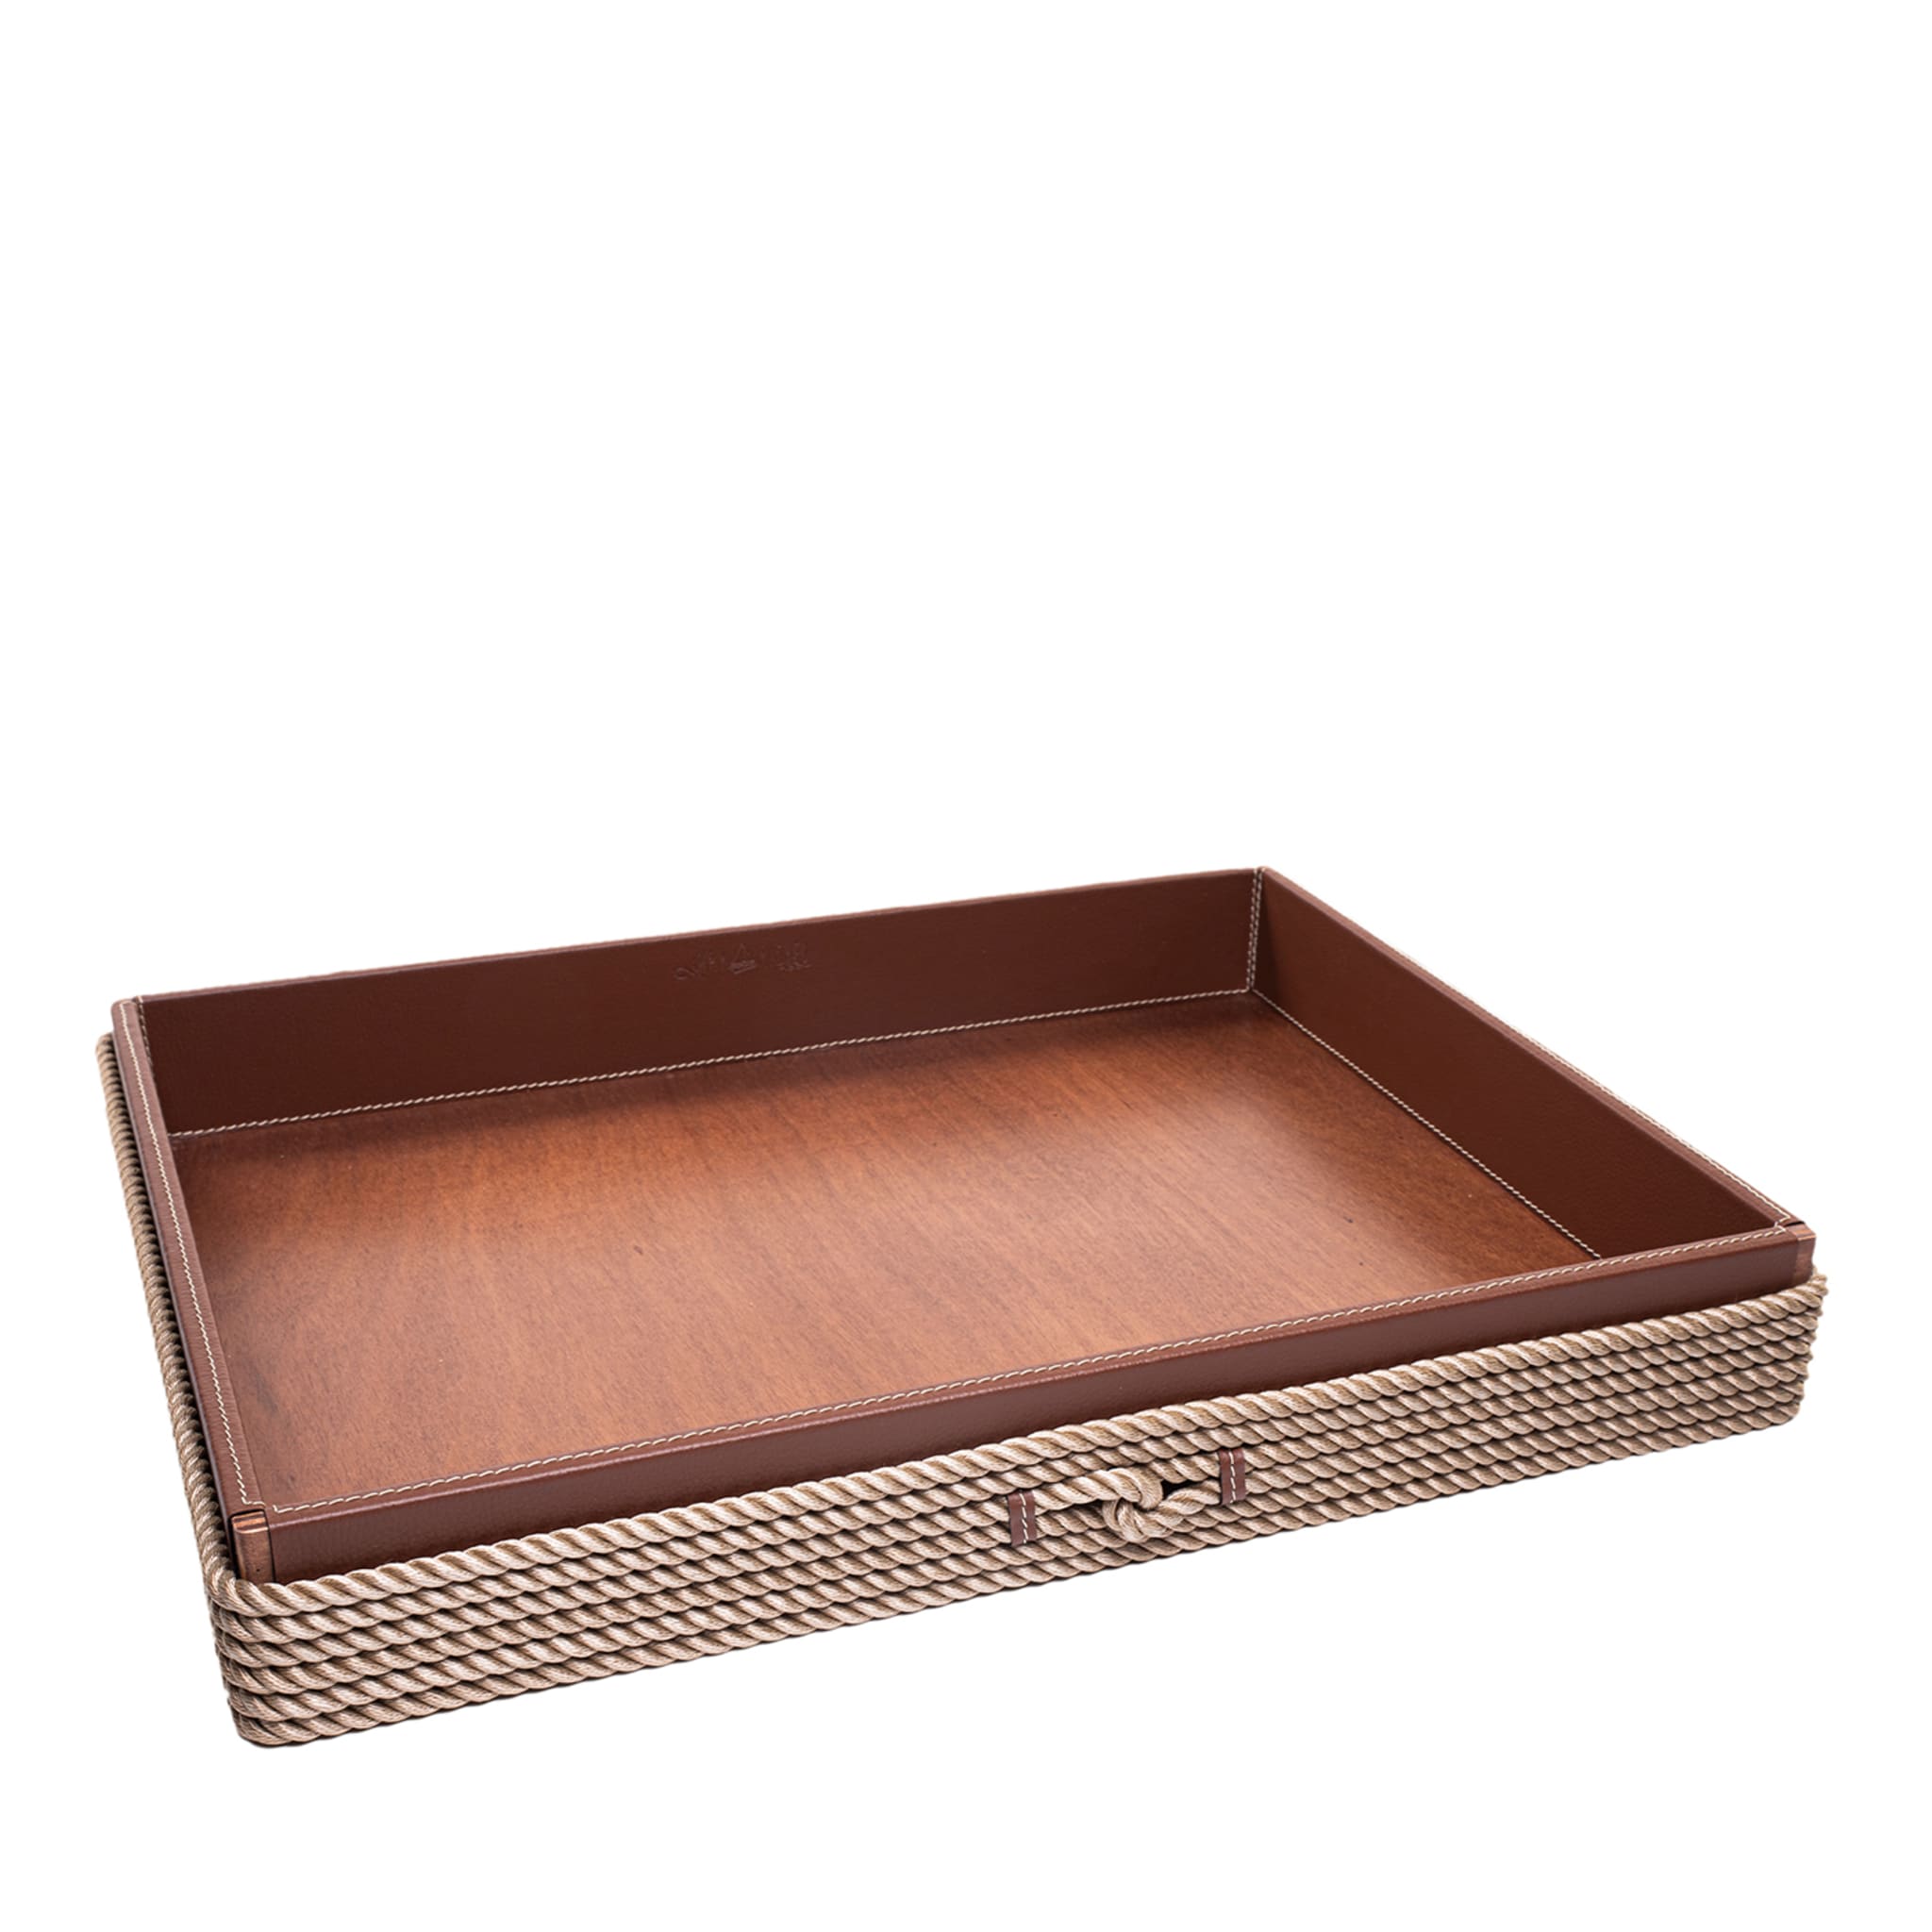 Extra-Large Rectangular Beige Tray with Rope Inserts - Main view